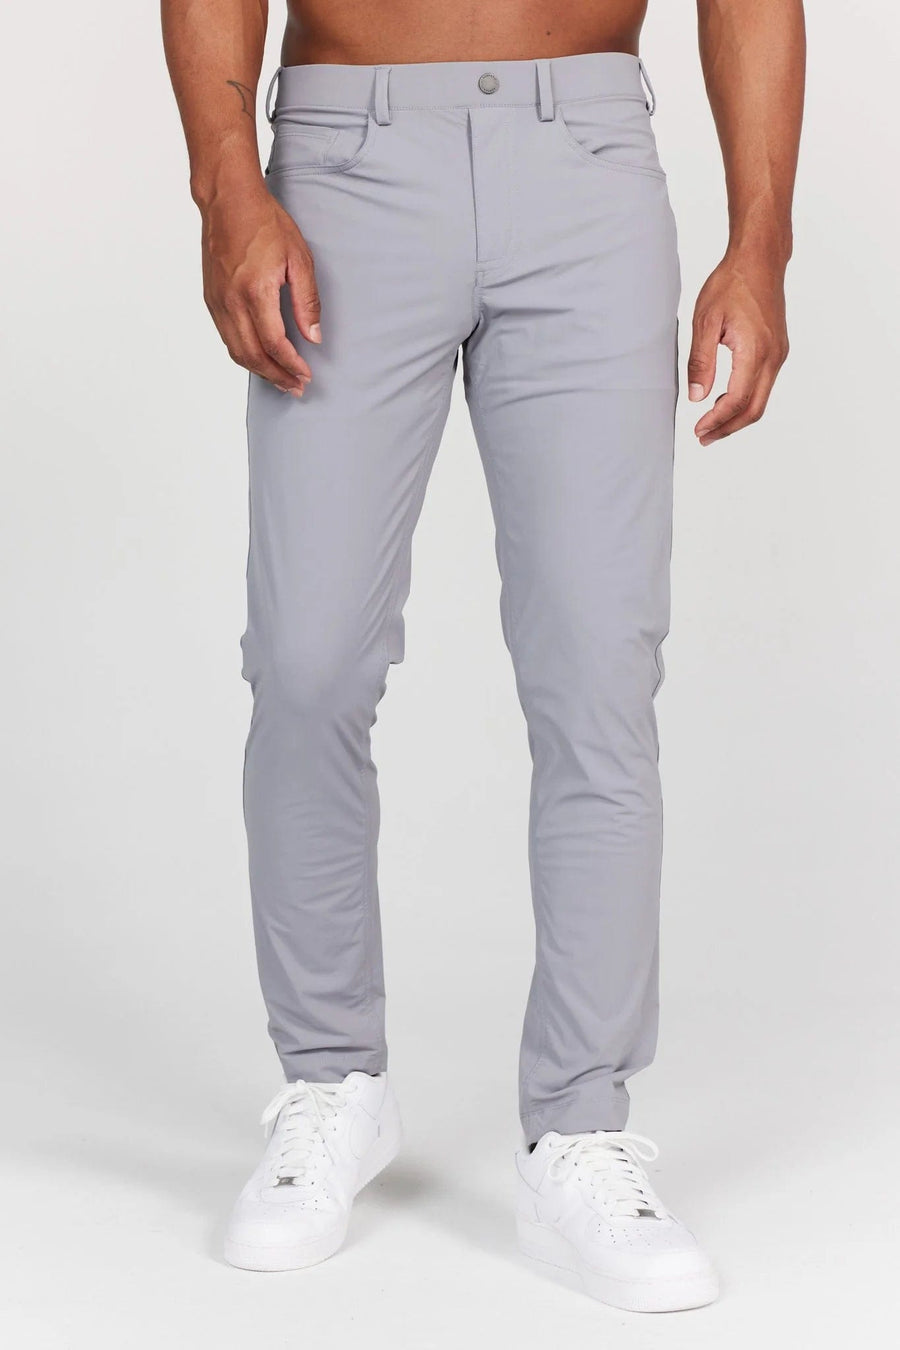 REDVANLY PANTS - FIVE POCKET SHADOW GREY / XL KENT PULL-ON TROUSER